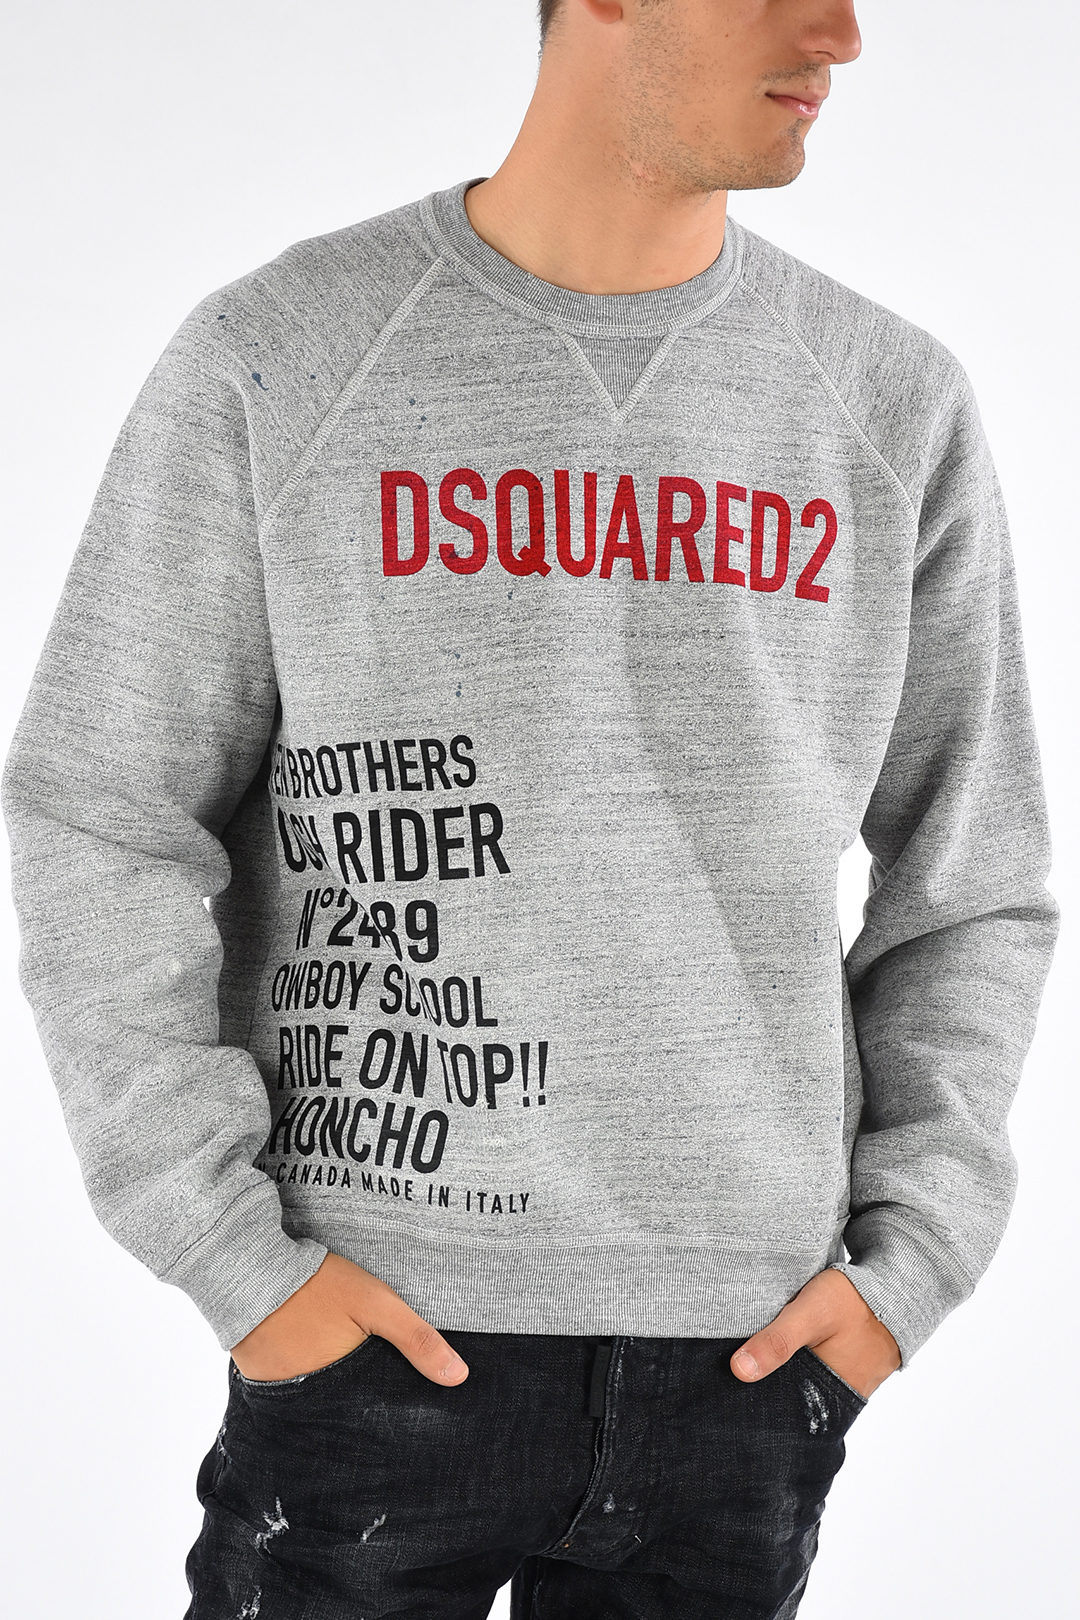 felpe dsquared uomo outlet